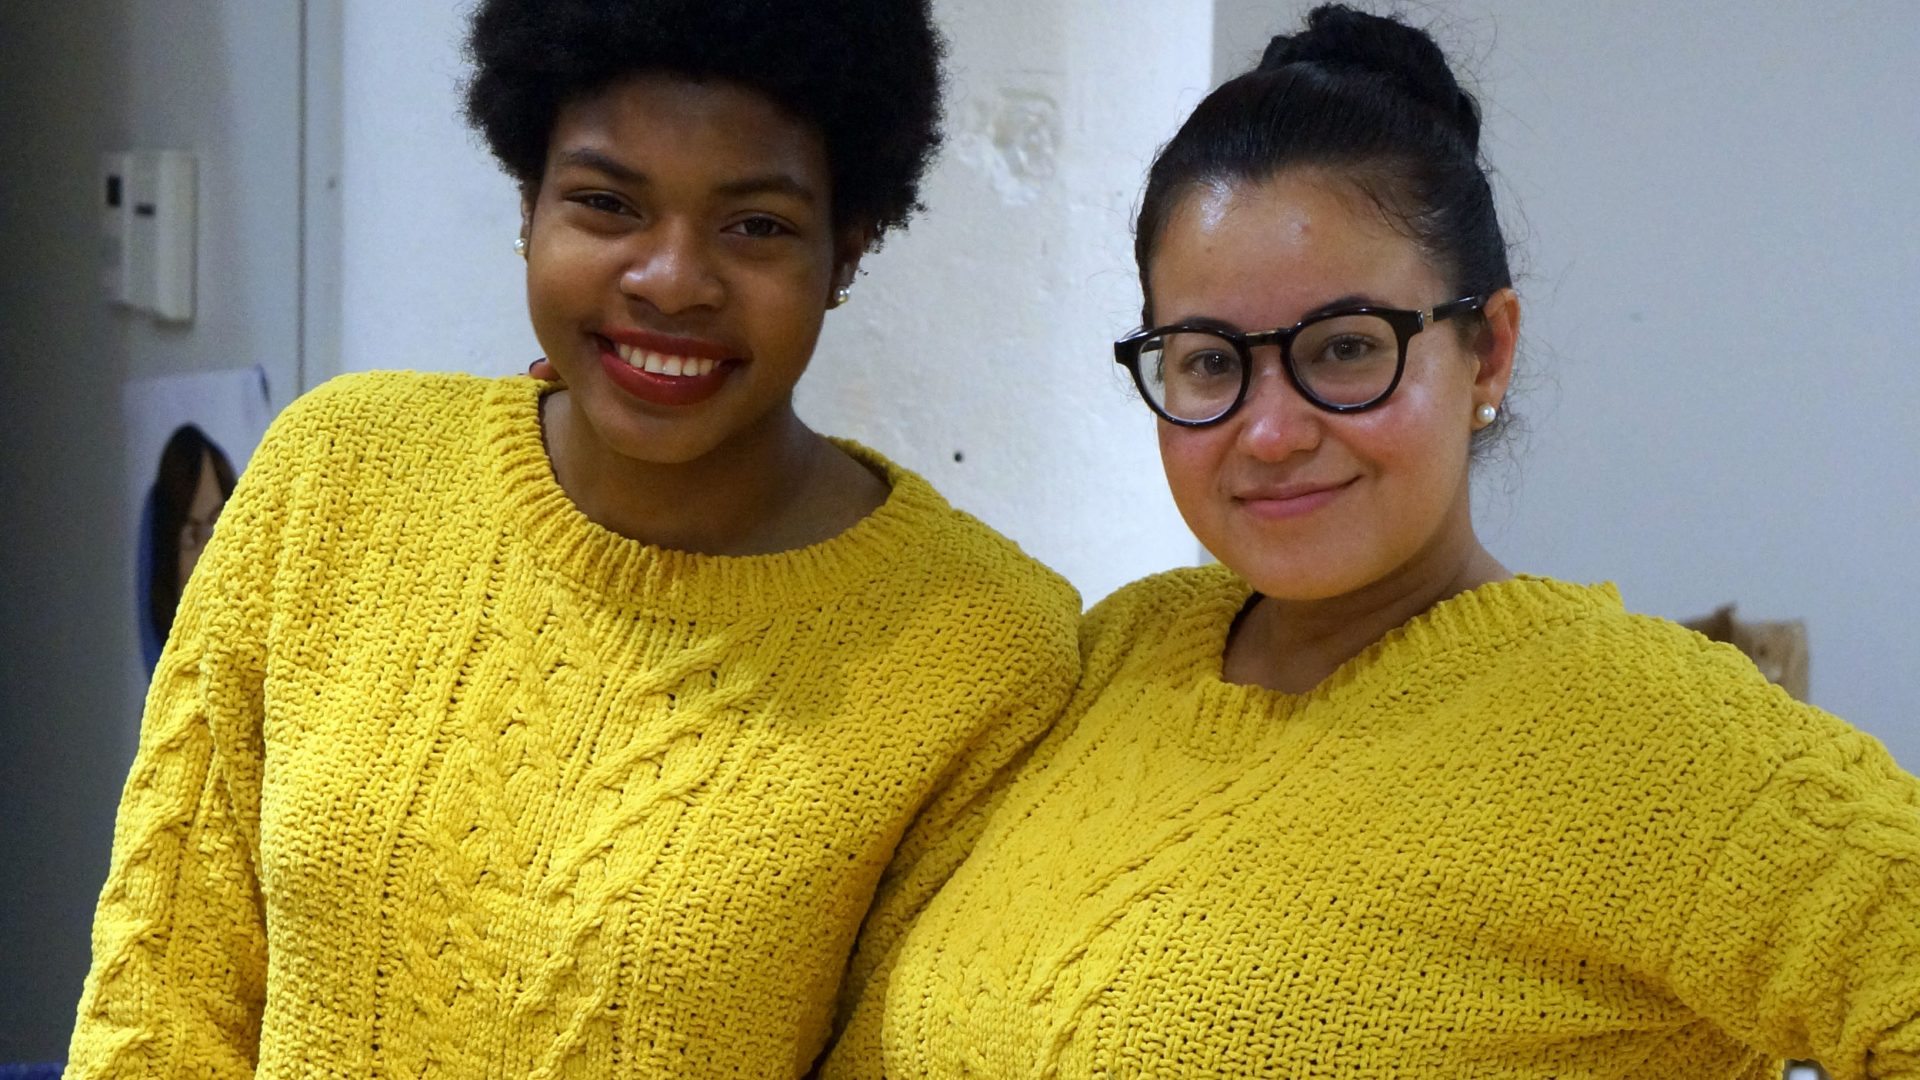 Leidy and her mentee pose for a picture, both in matching yellow sweaters